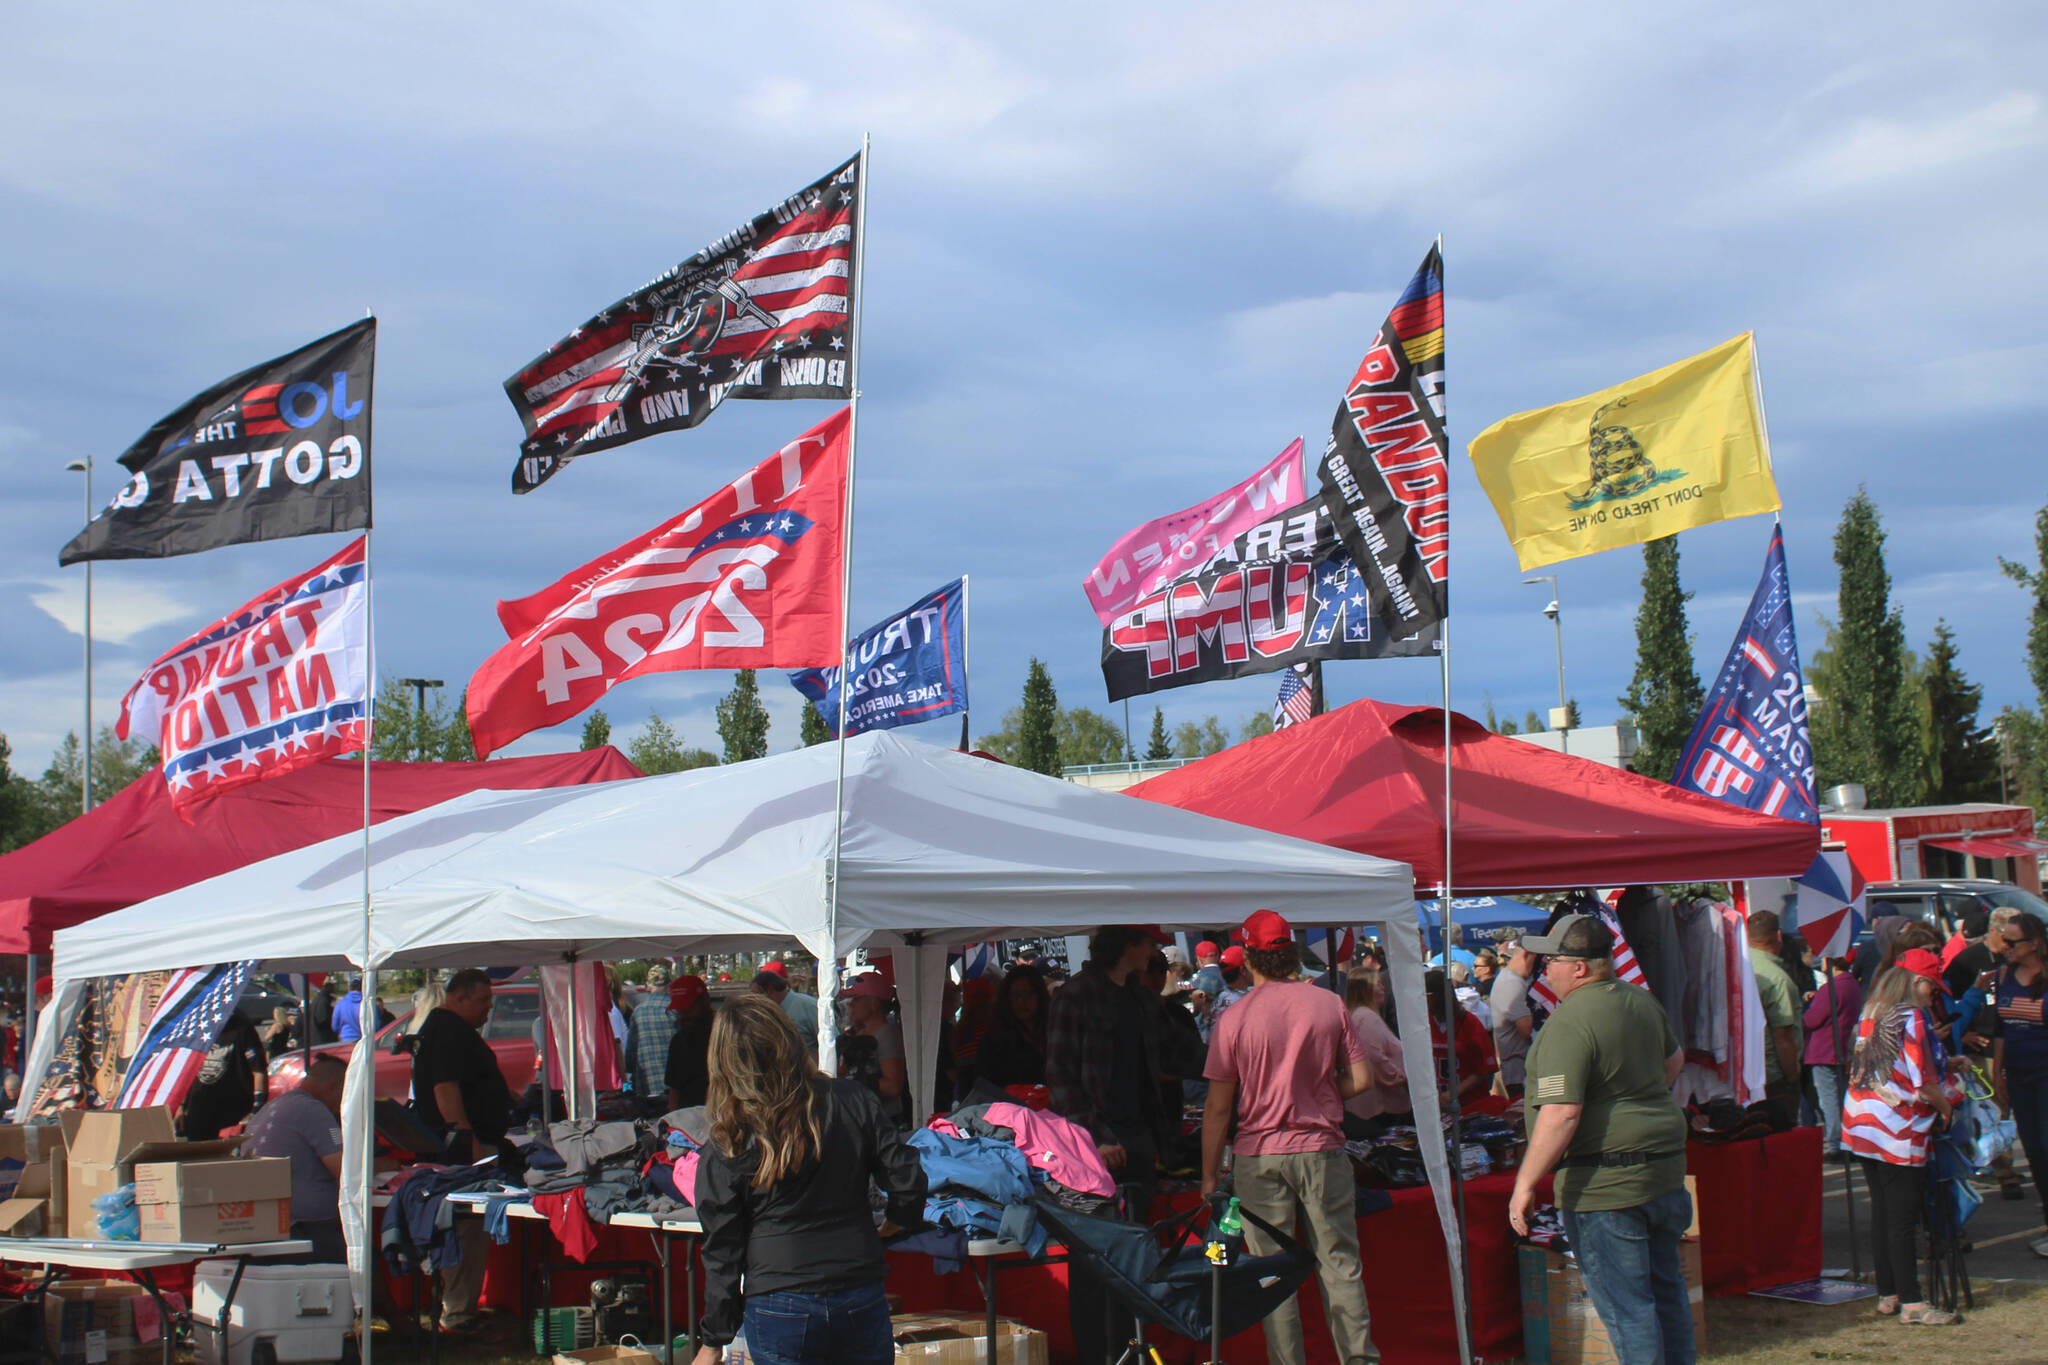 Vendors sell flags and other merchandise outside of the Alaska Airlines Center, where a Save America rally was being held, on Saturday, July 9, 2022, in Anchorage, Alaska. Former President Donald Trump, U.S. Senate candidate Kelly Tshibaka and U.S. House candidate Sarah Palin were among the event’s speakers. (Ashlyn O’Hara/Peninsula Clarion)